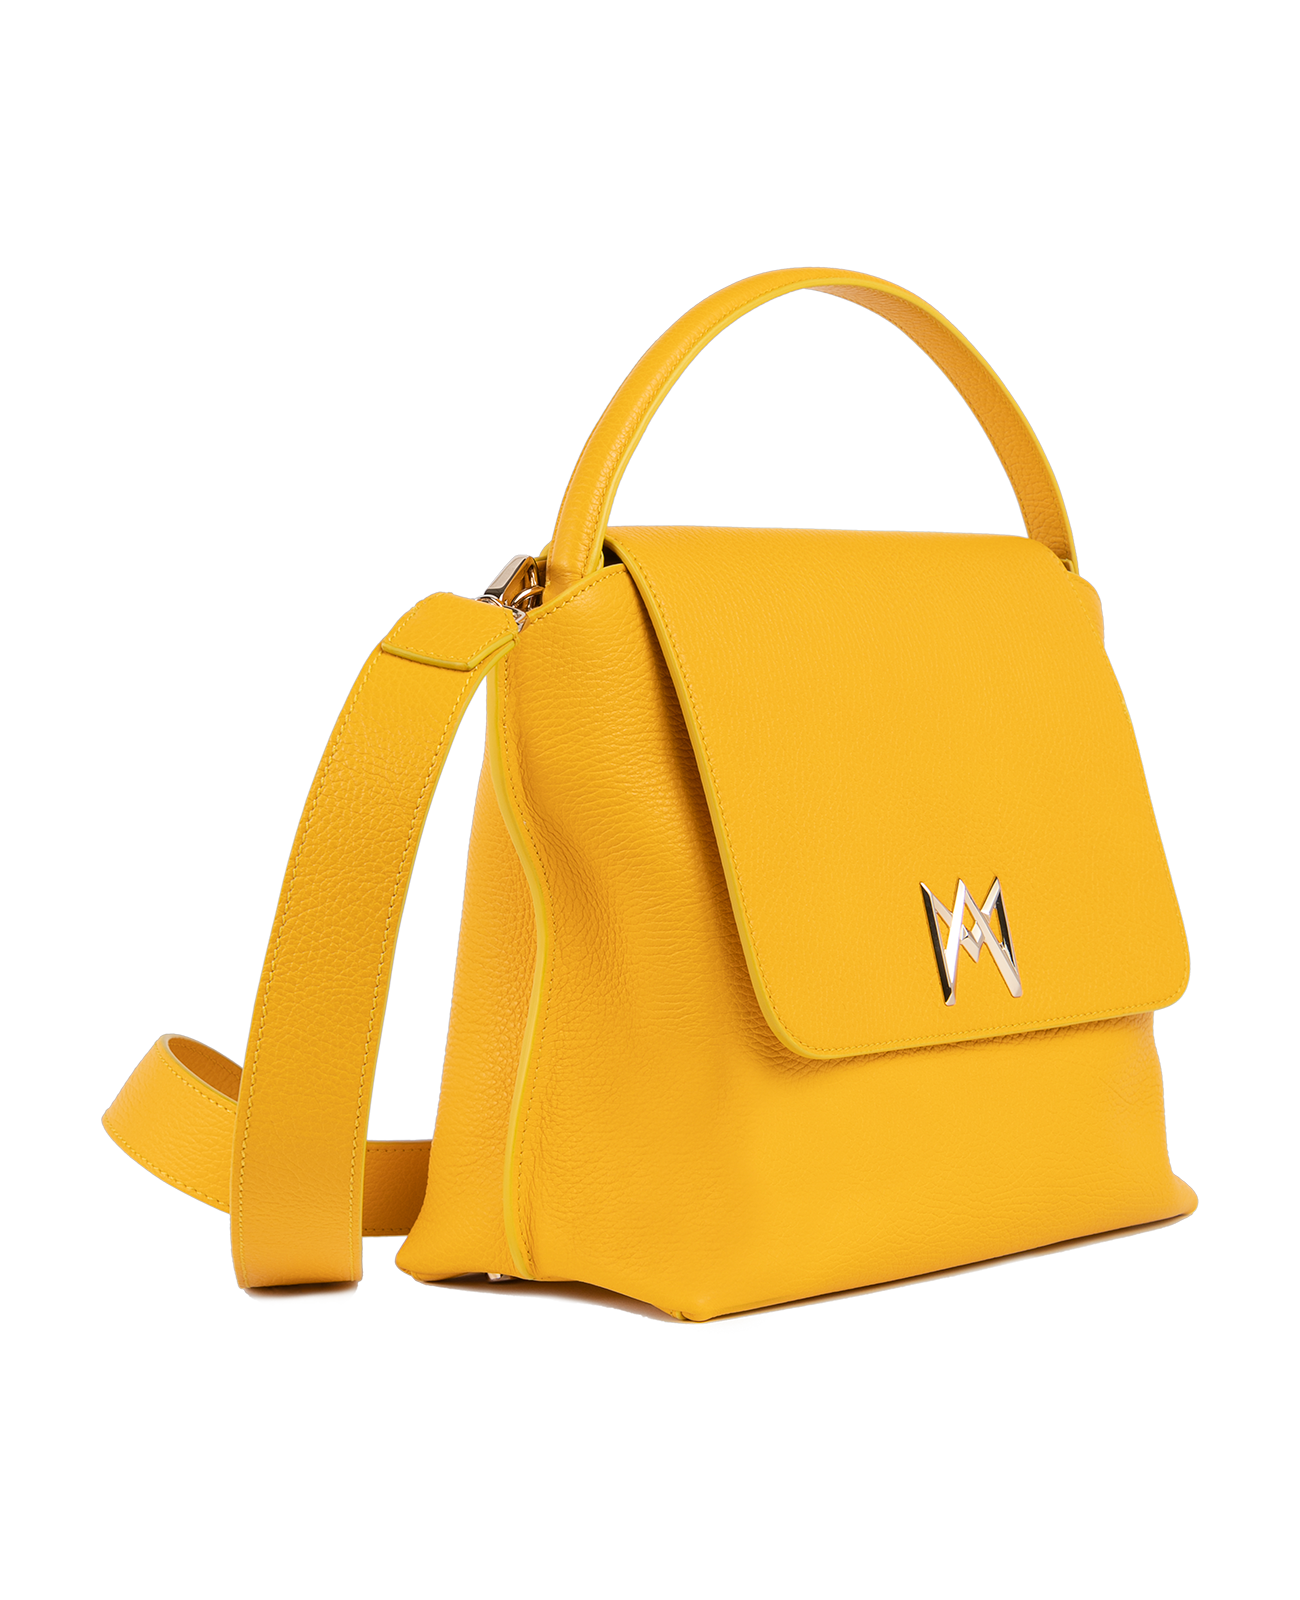 Cross-body bag in Italian full-grain leather, semi-aniline calf Italian leather with detachable shoulder strap.Three compartments, zip pocket in the back compartment. Magnetic flap closure with logo. Color: Yellow. Size:Large